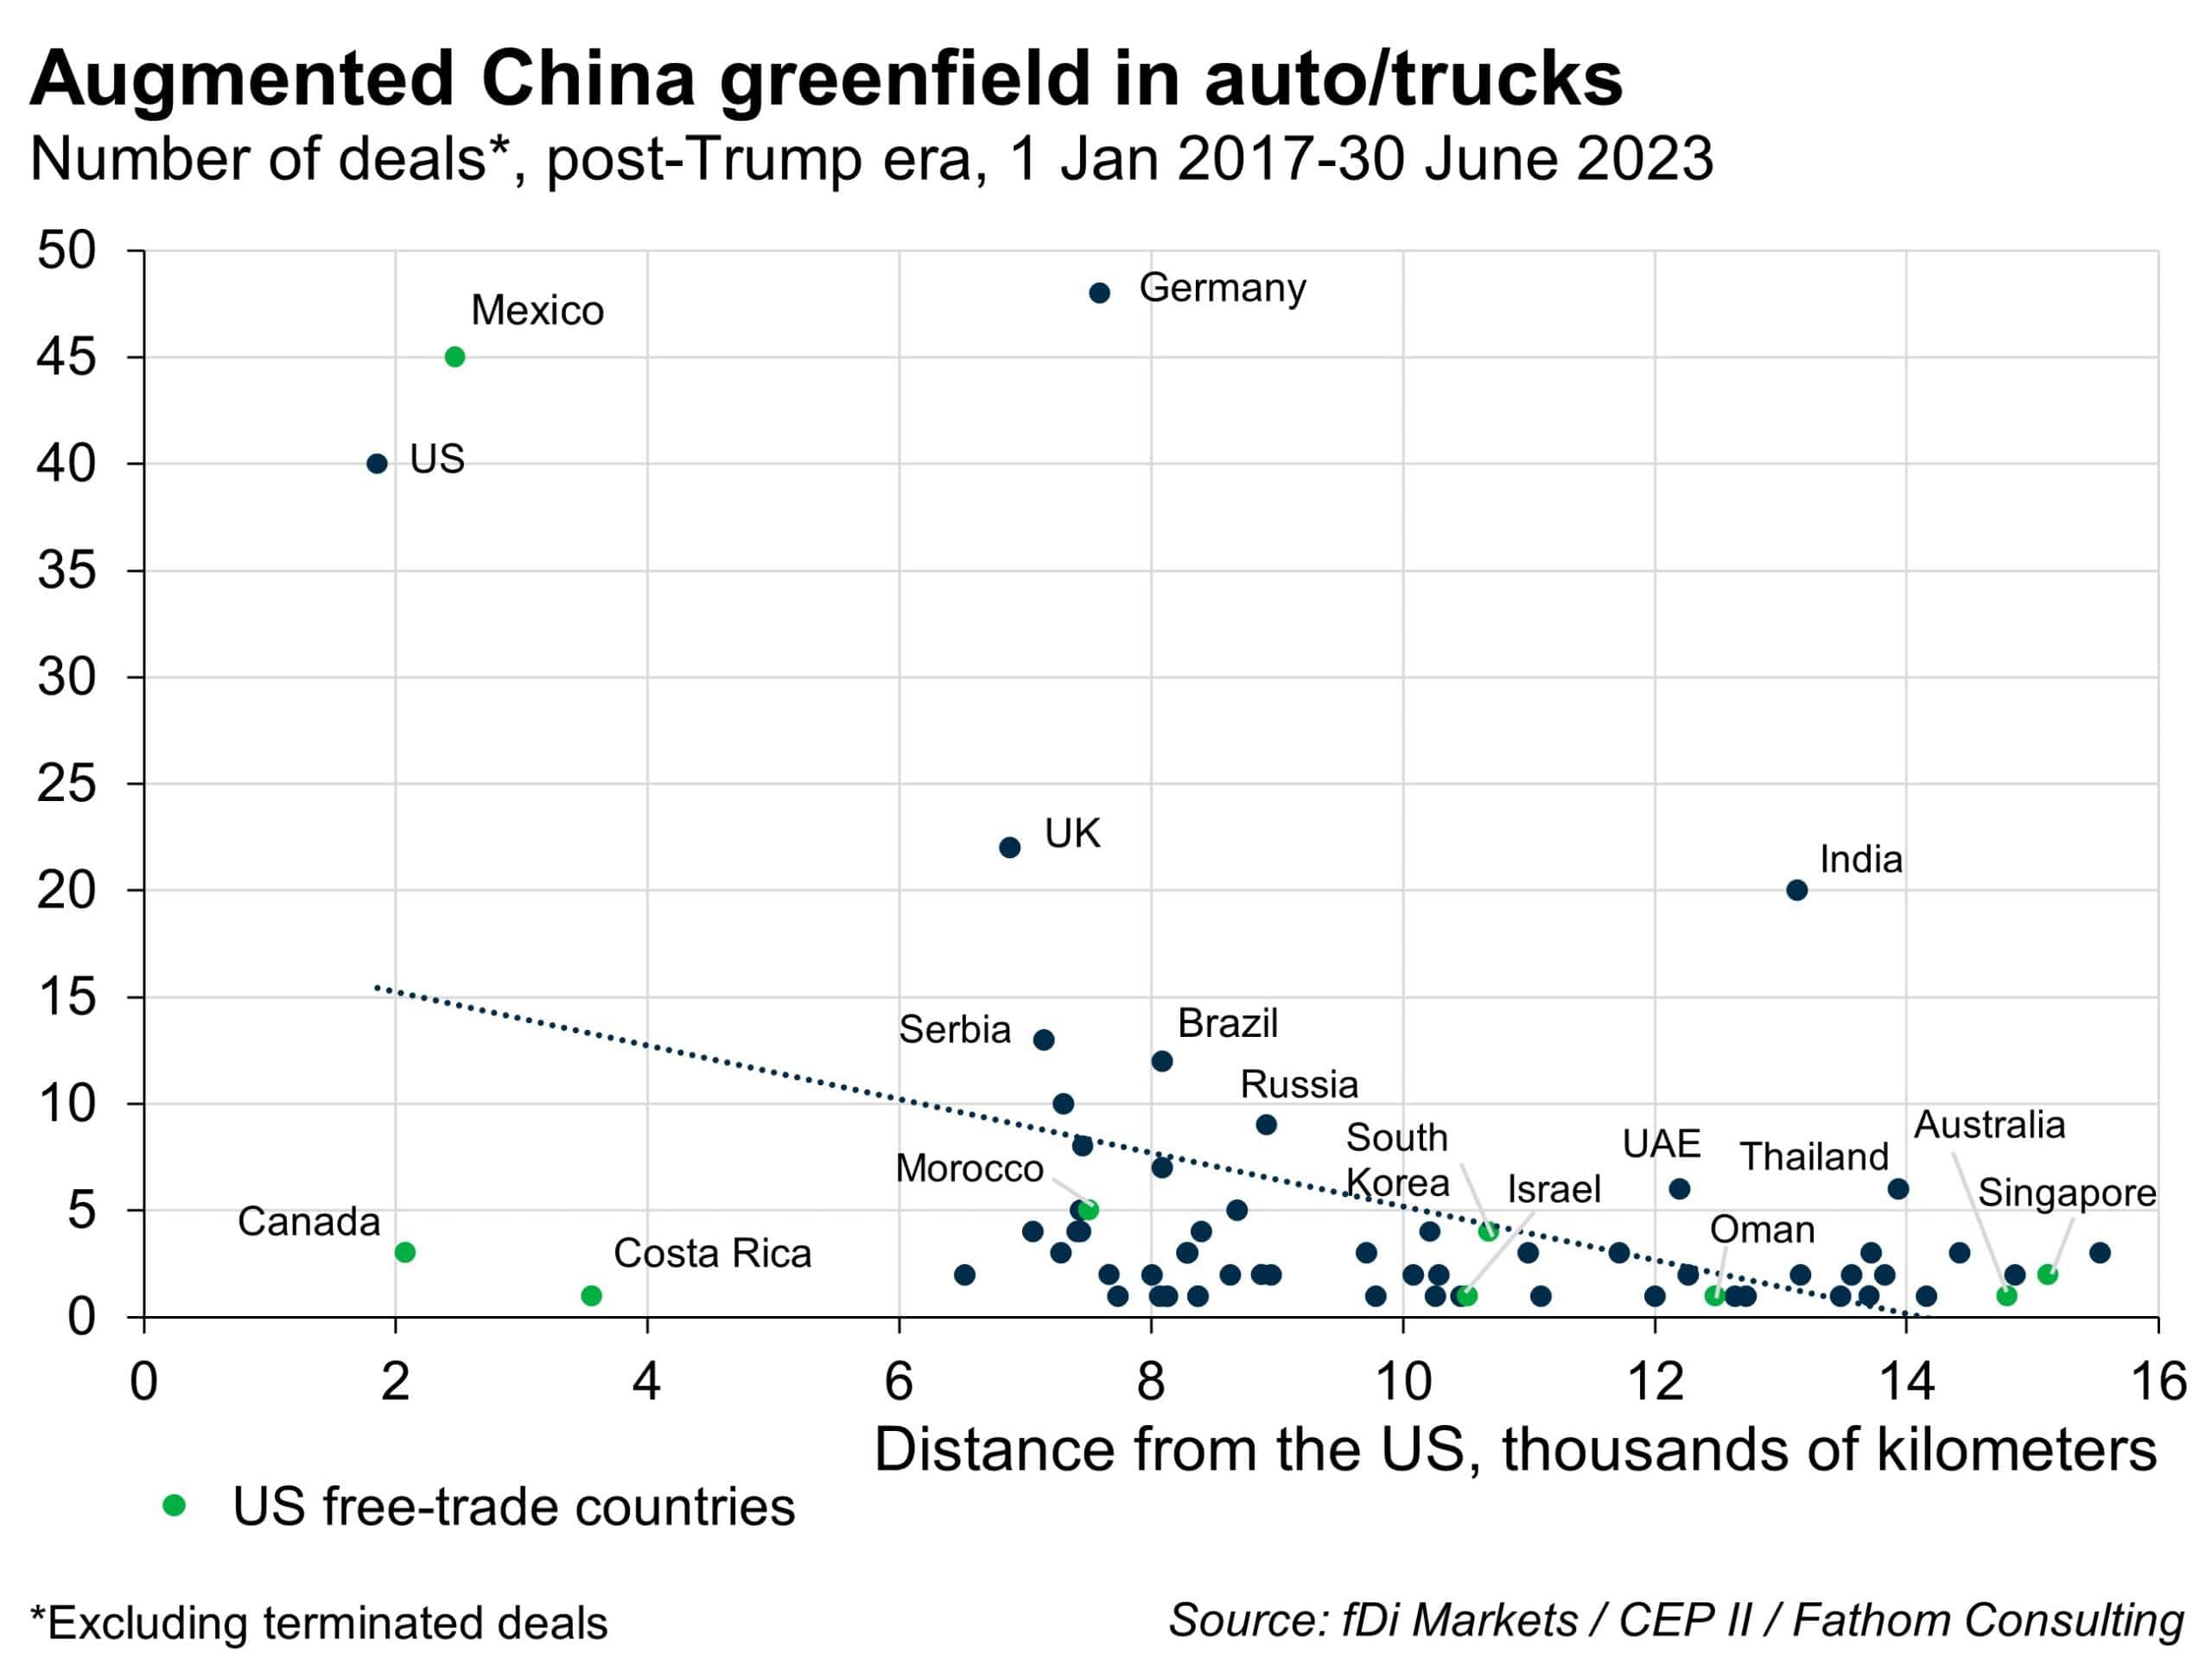 Augmented China greenfield in auto/trucks, Number of deals, 1 Jan 2017-30 June 2023, by distance from US, thousands of kilometers